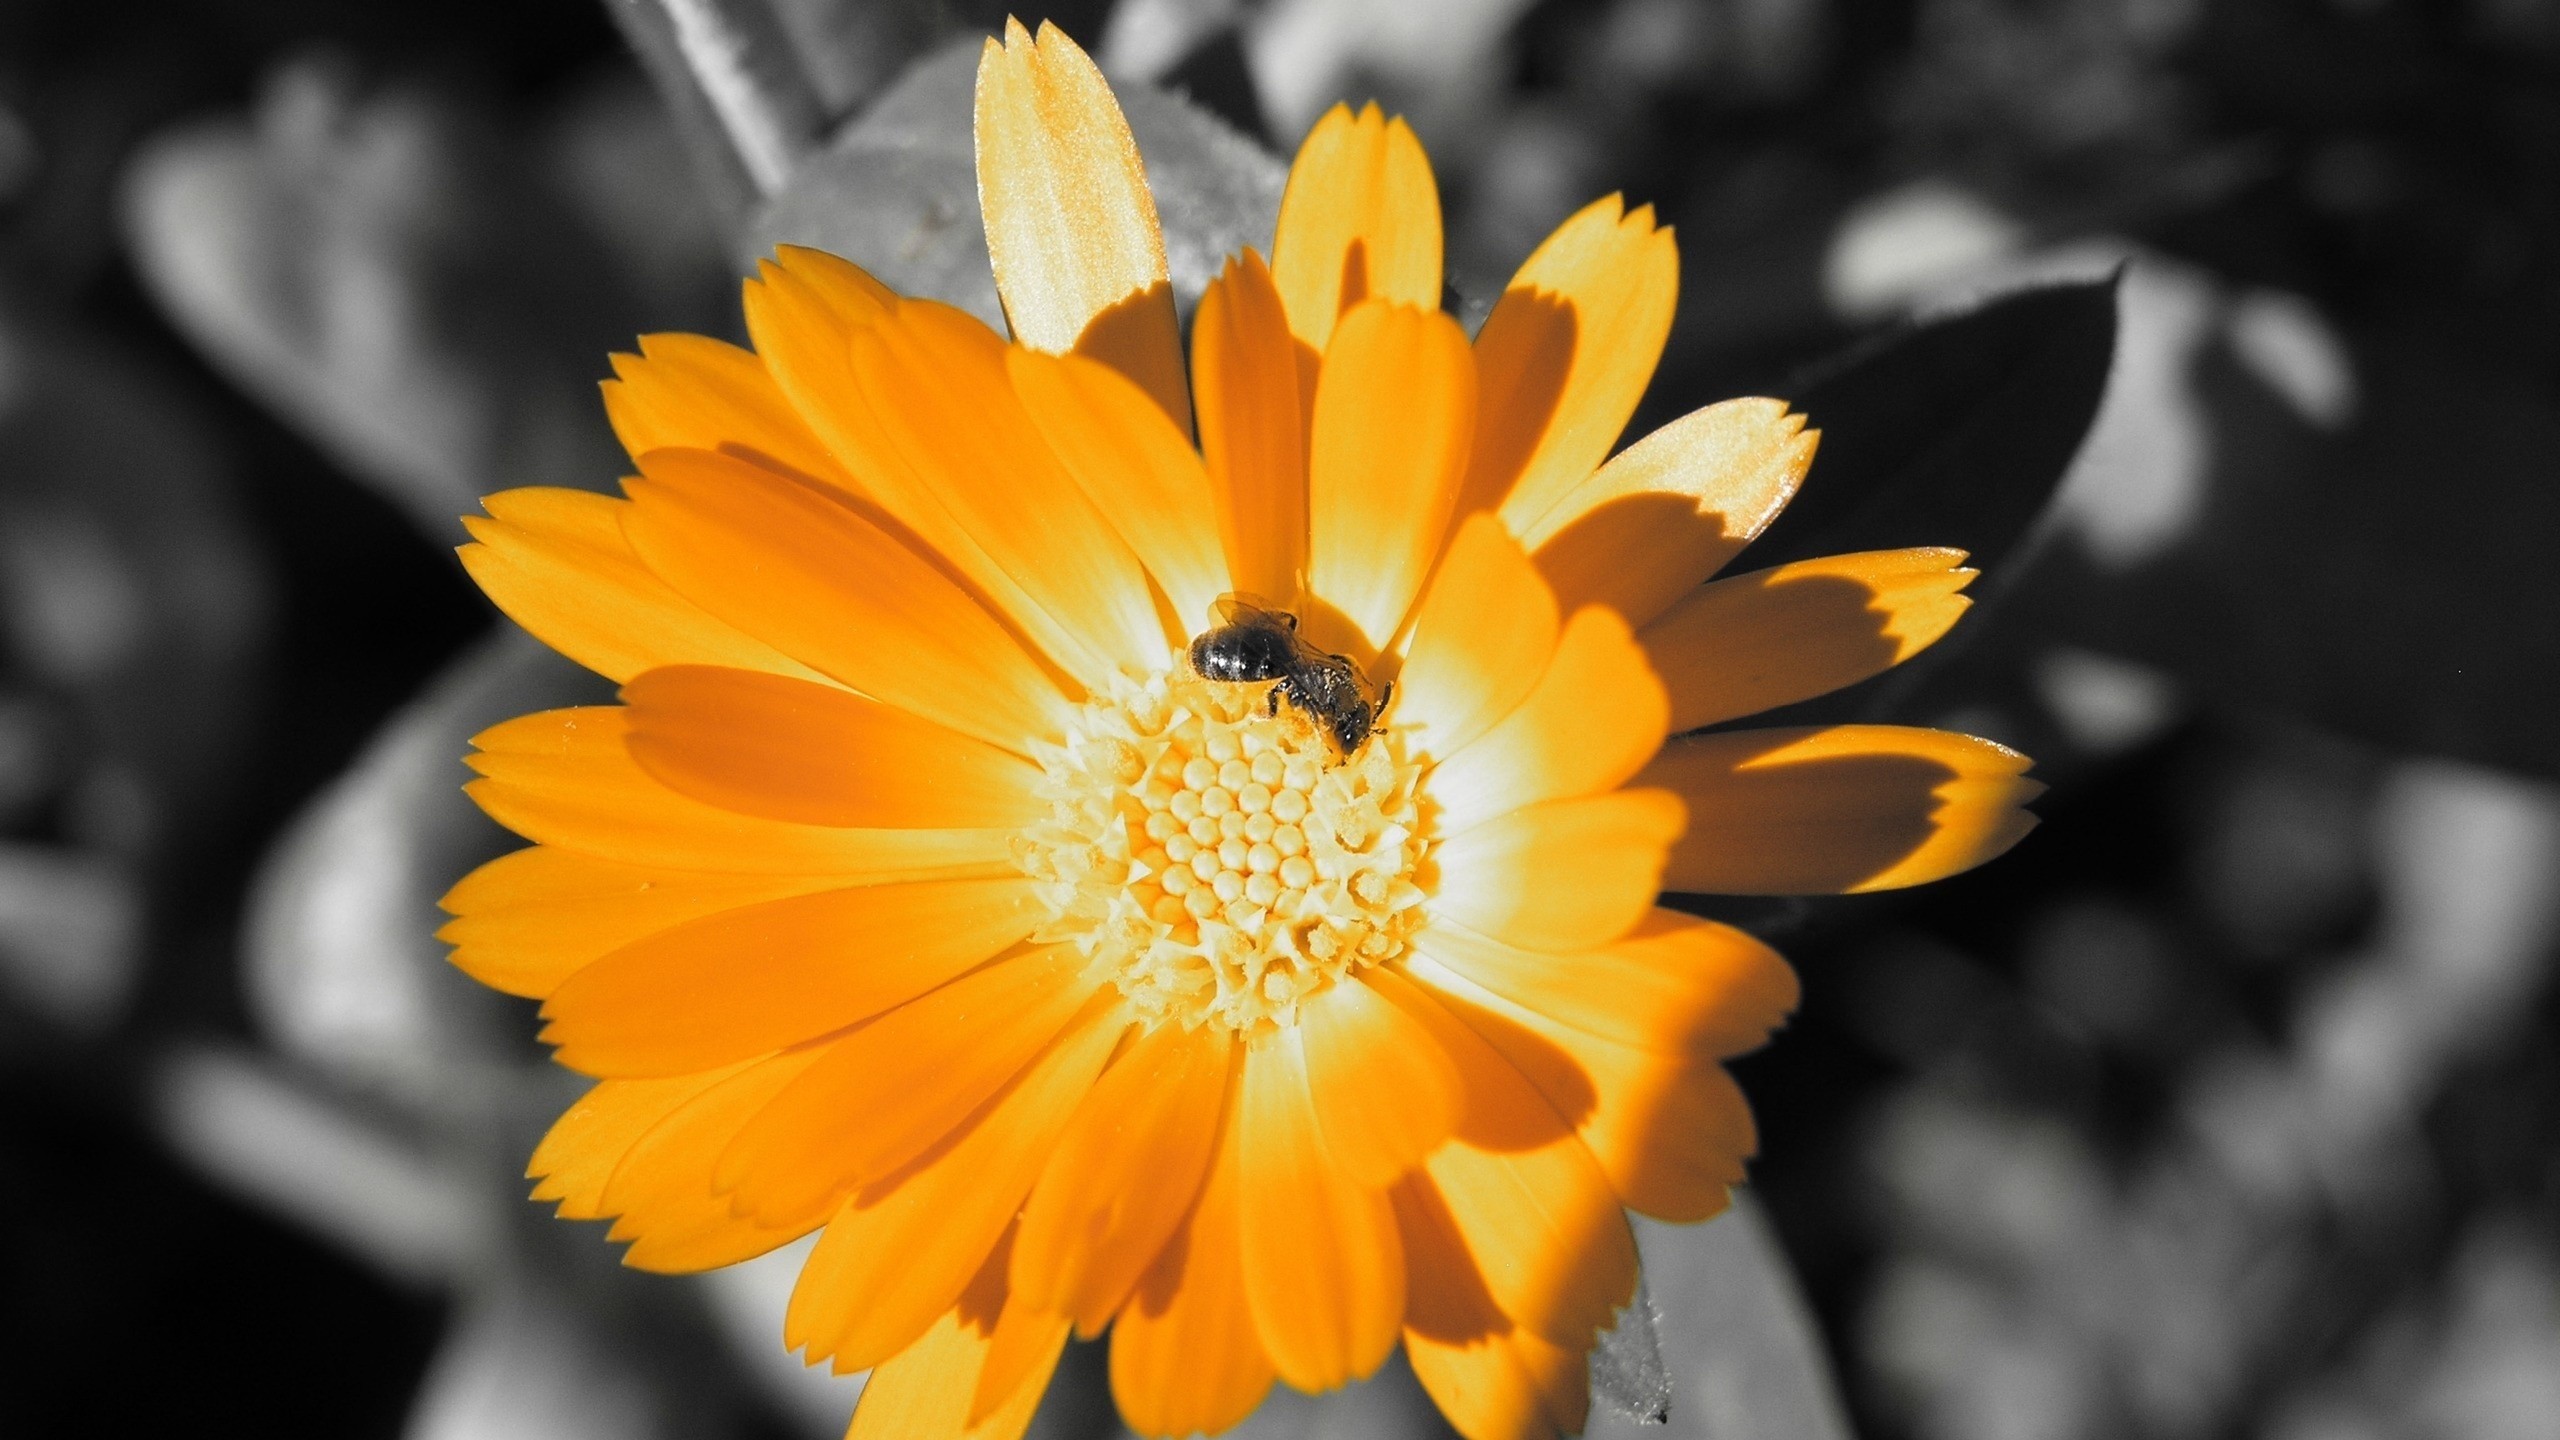 General 2560x1440 selective coloring insect flowers animals plants yellow